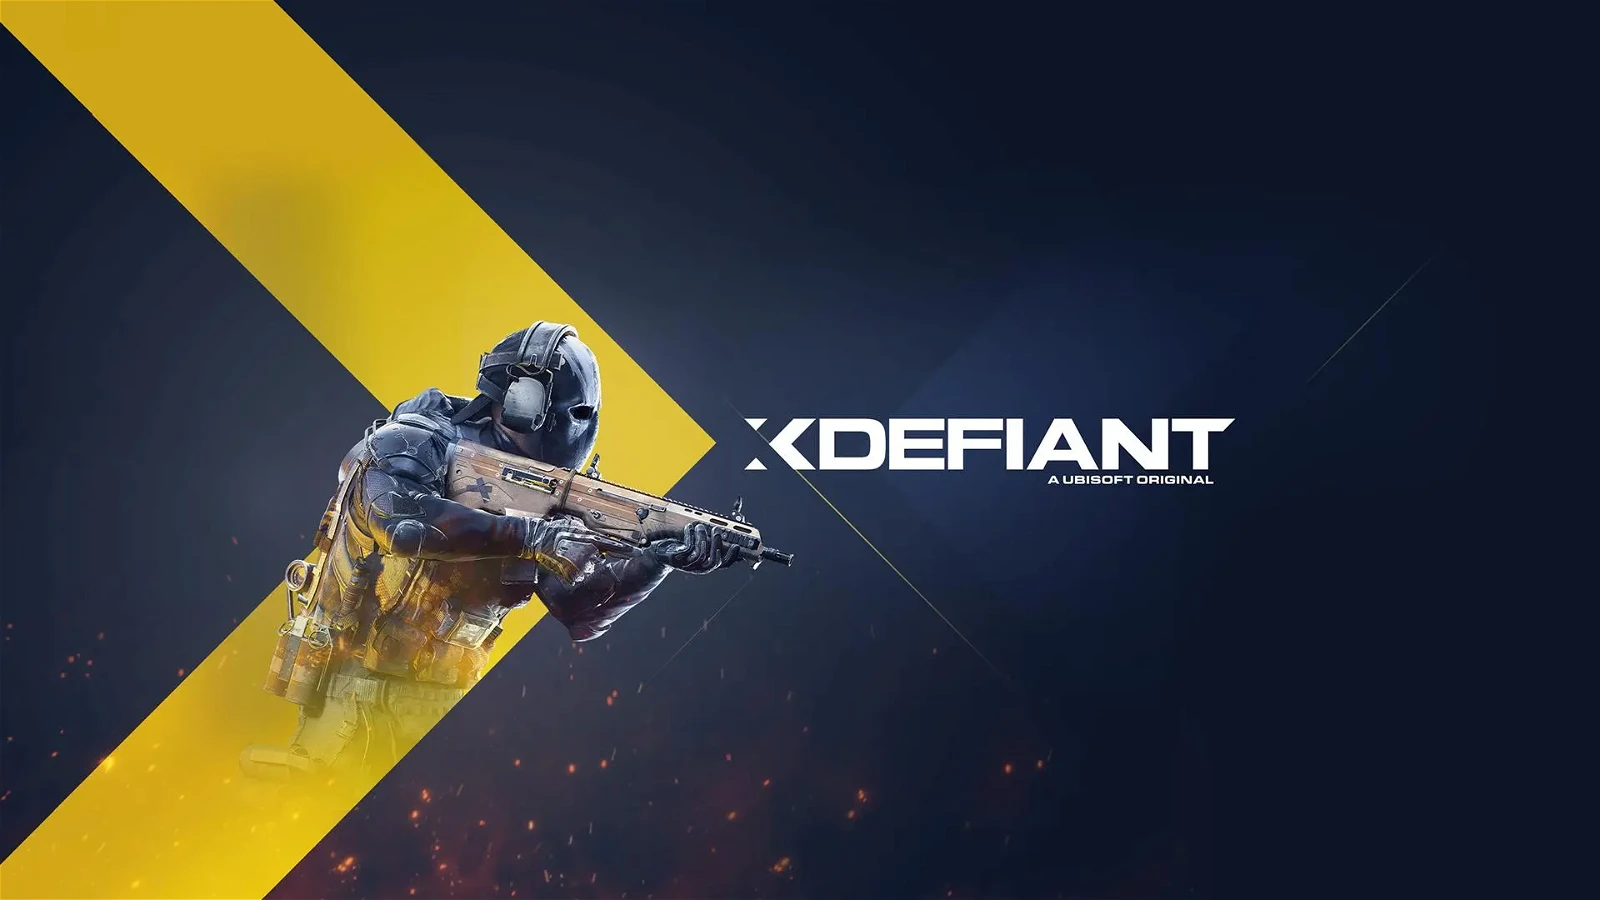 XDefiant aims to revert the mistakes after listening to the player's feedback.